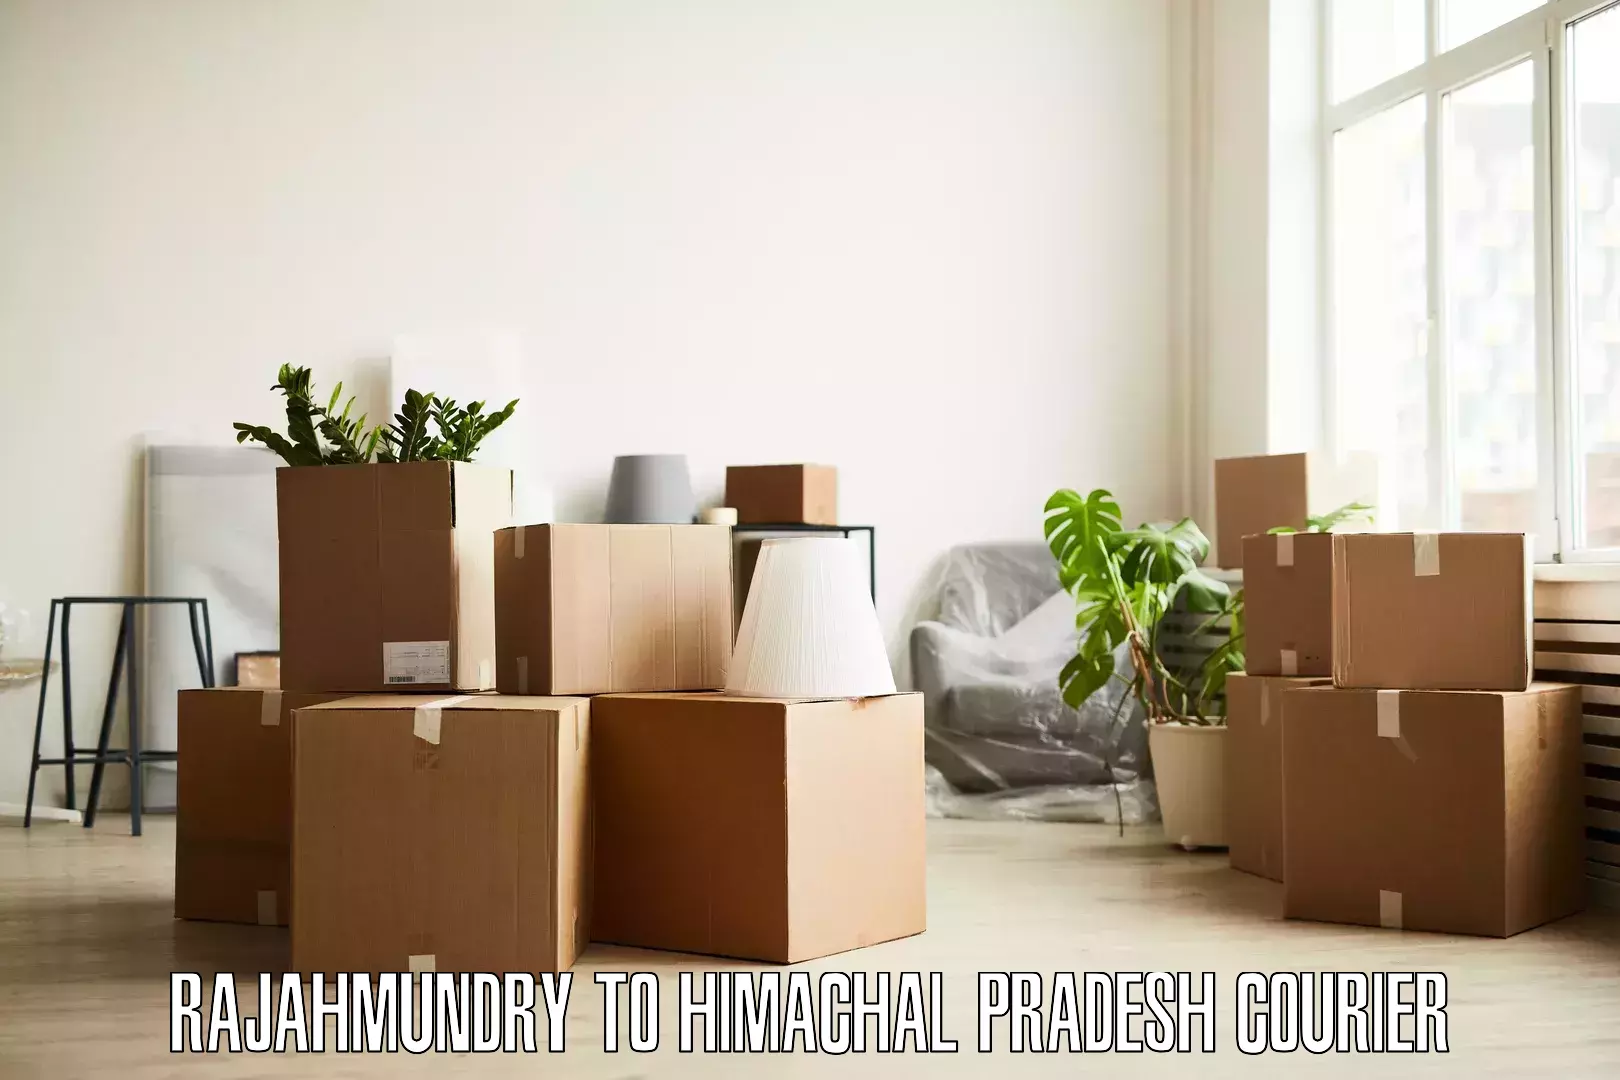 Moving and packing experts Rajahmundry to Rehan